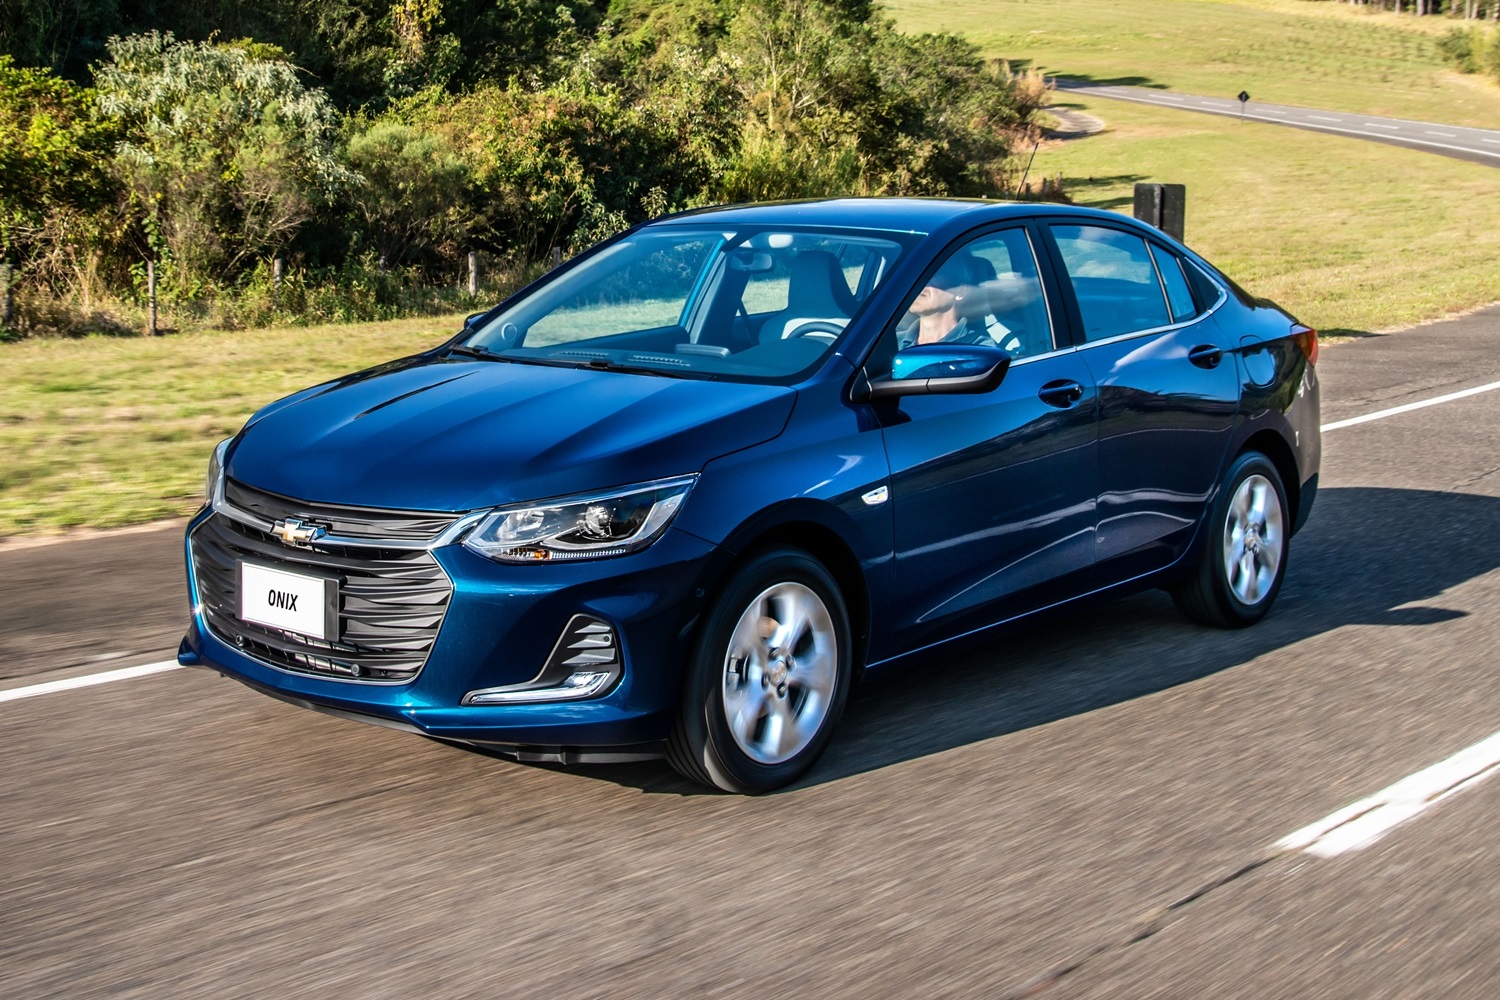 Brazil January 2020: Chevrolet Onix Plus smashes Prisma record in third  market drop in past 6 months (-3.1%) – Best Selling Cars Blog